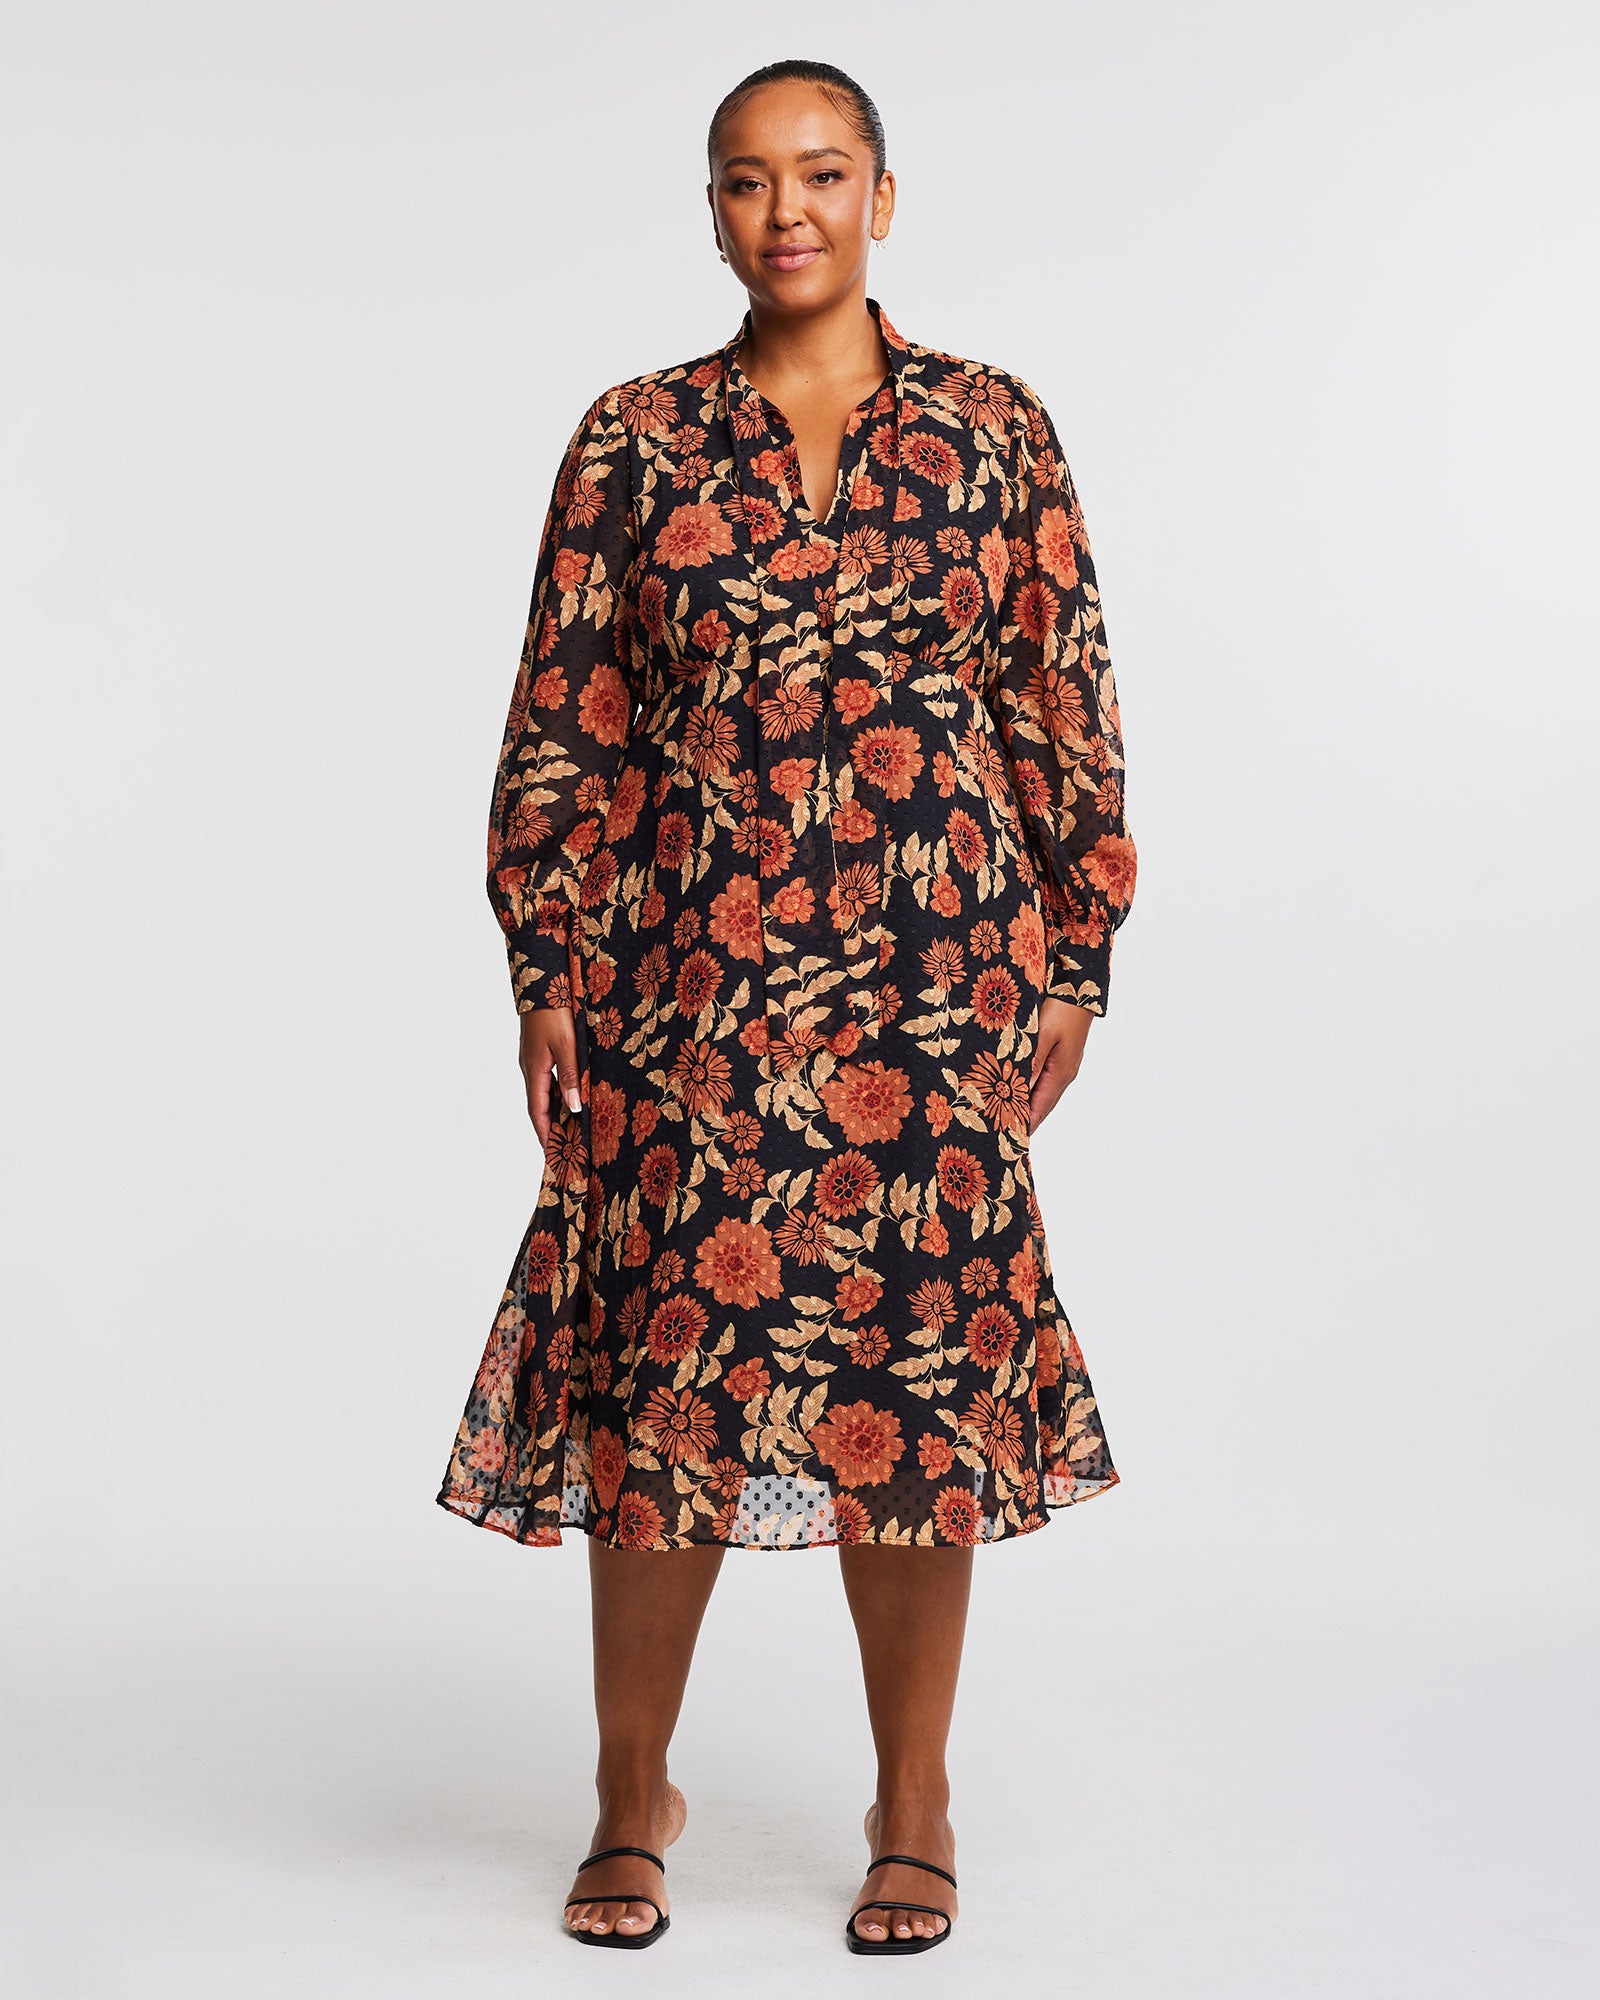 A plus size woman wearing an Autumnal Floral Midi Dress with Neck-Tie in autumnal hues.